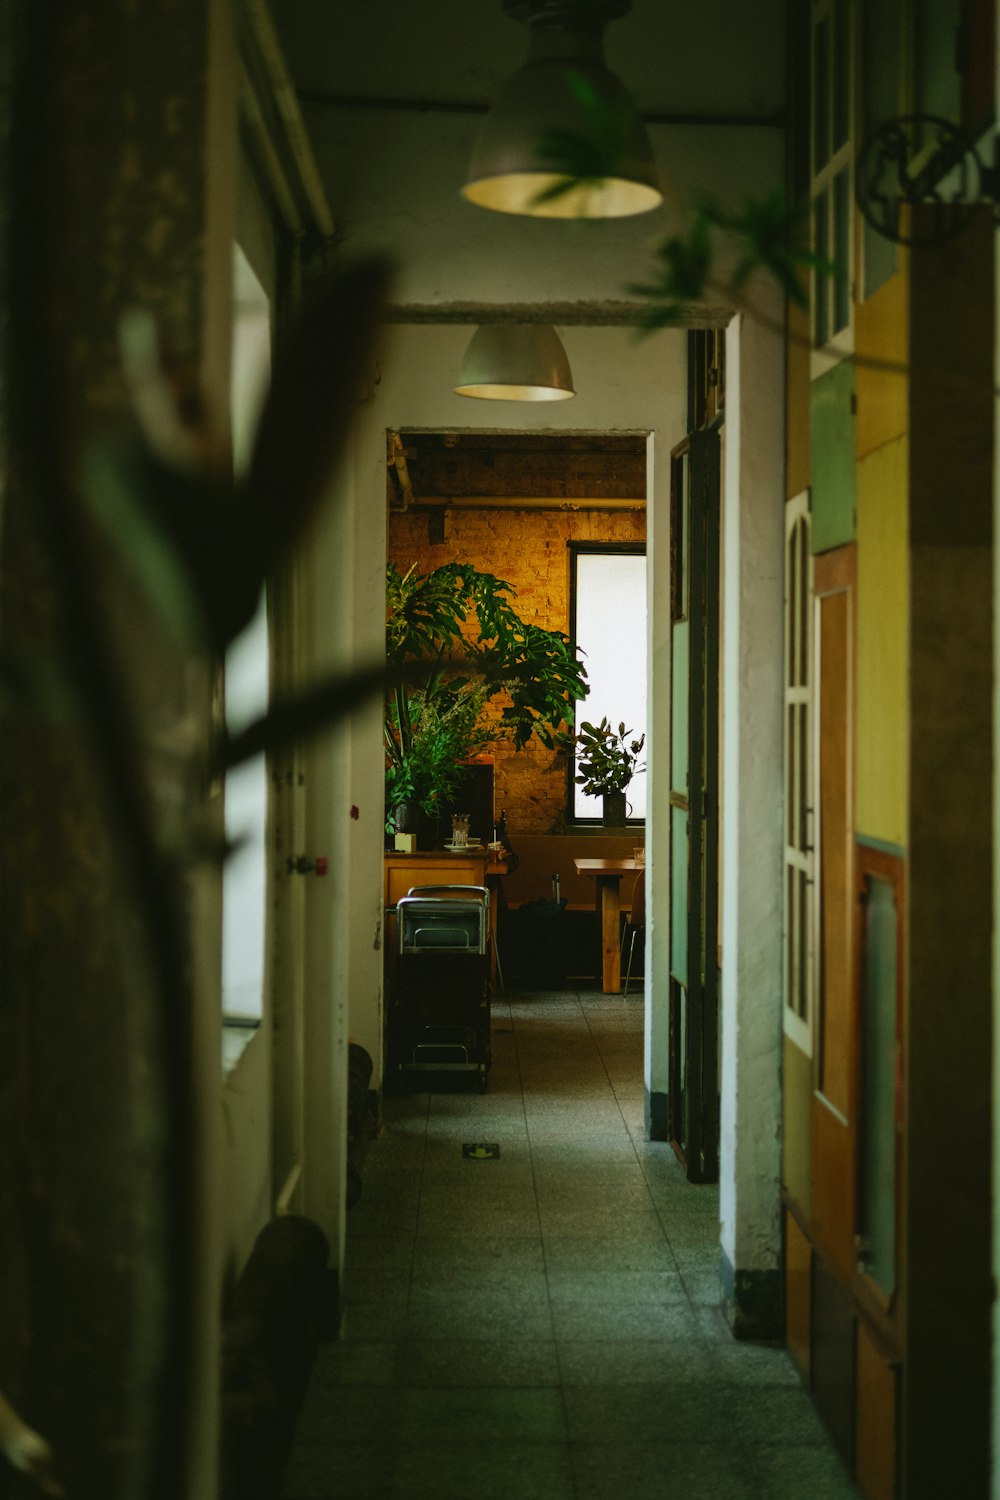 a long hallway with a potted plant on the wall